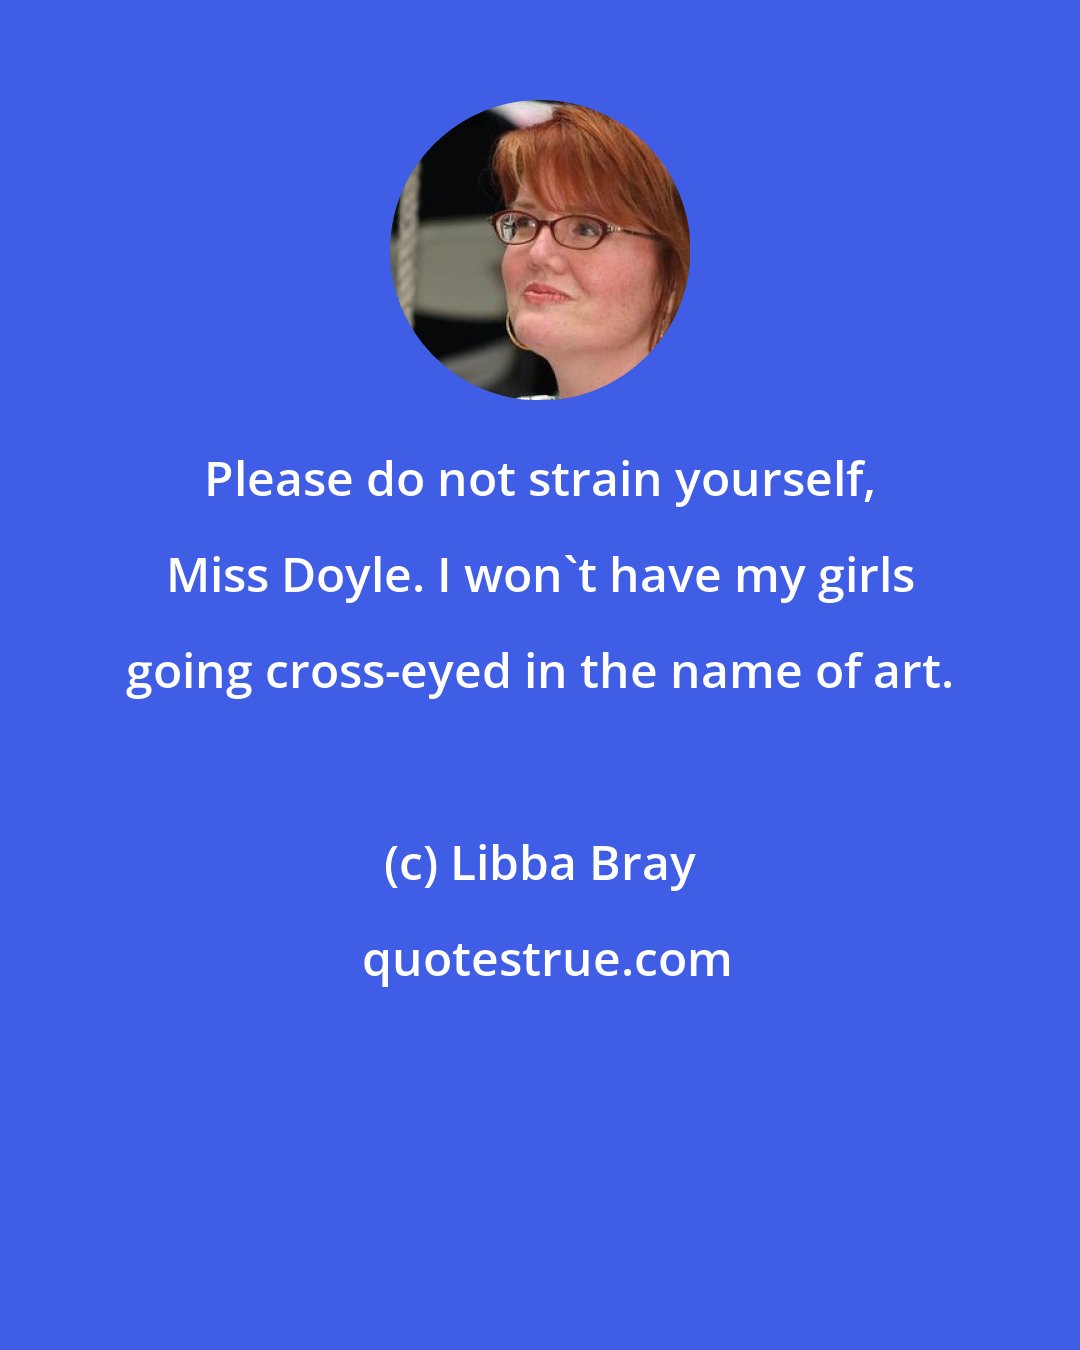 Libba Bray: Please do not strain yourself, Miss Doyle. I won't have my girls going cross-eyed in the name of art.